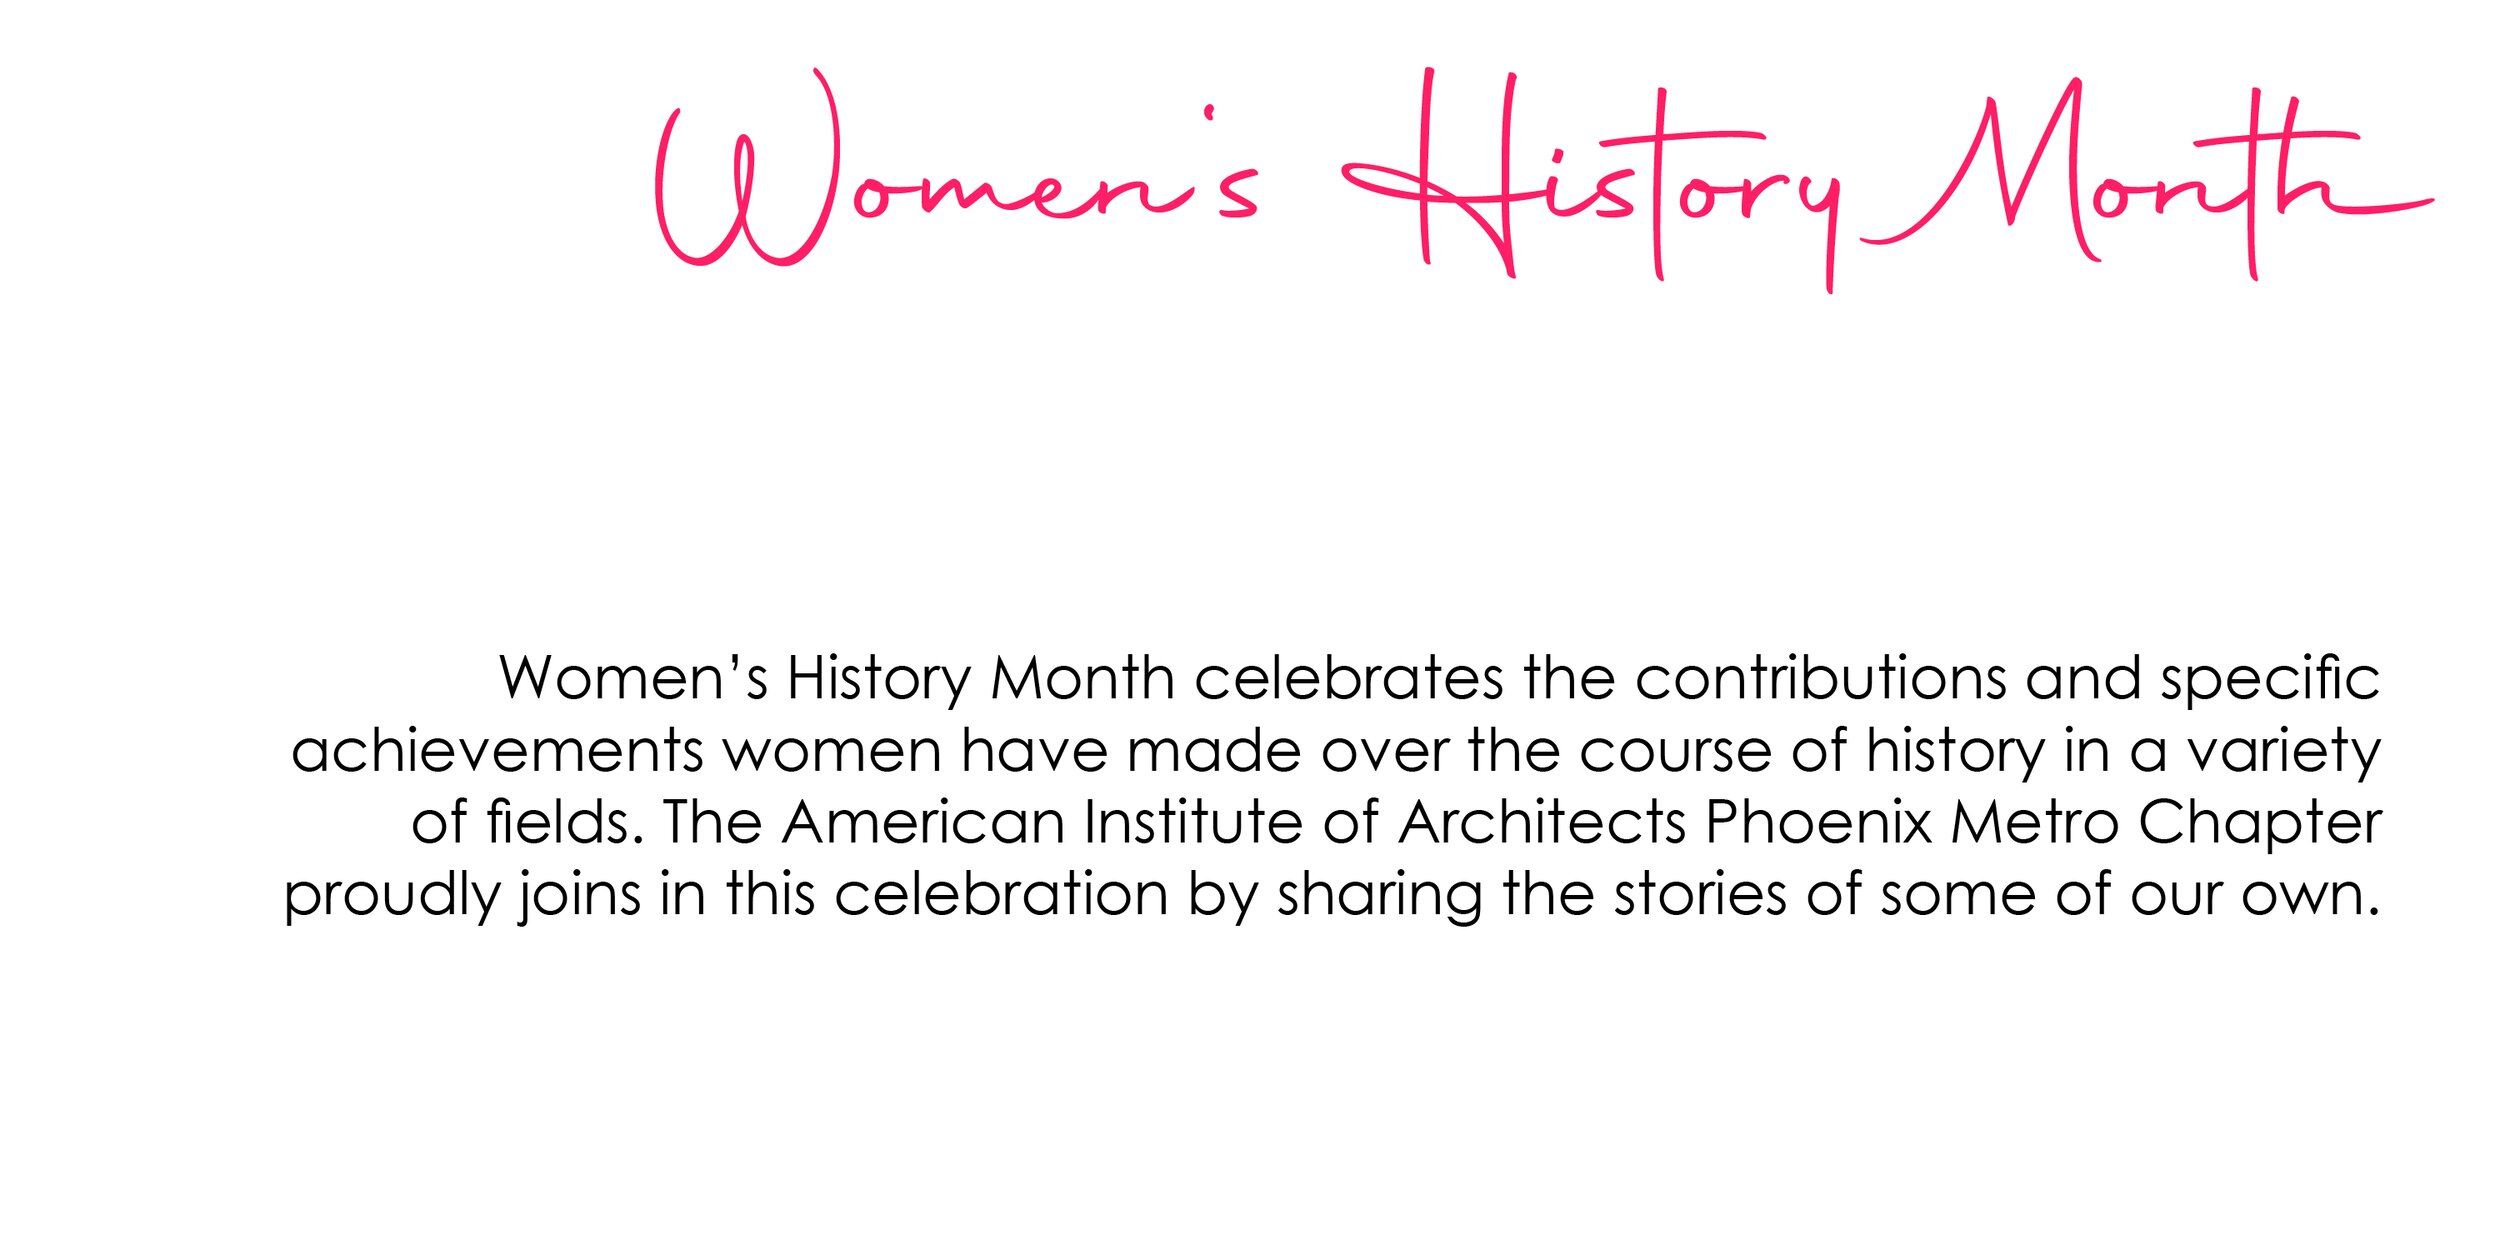 Women's History Month - Banners6.jpg